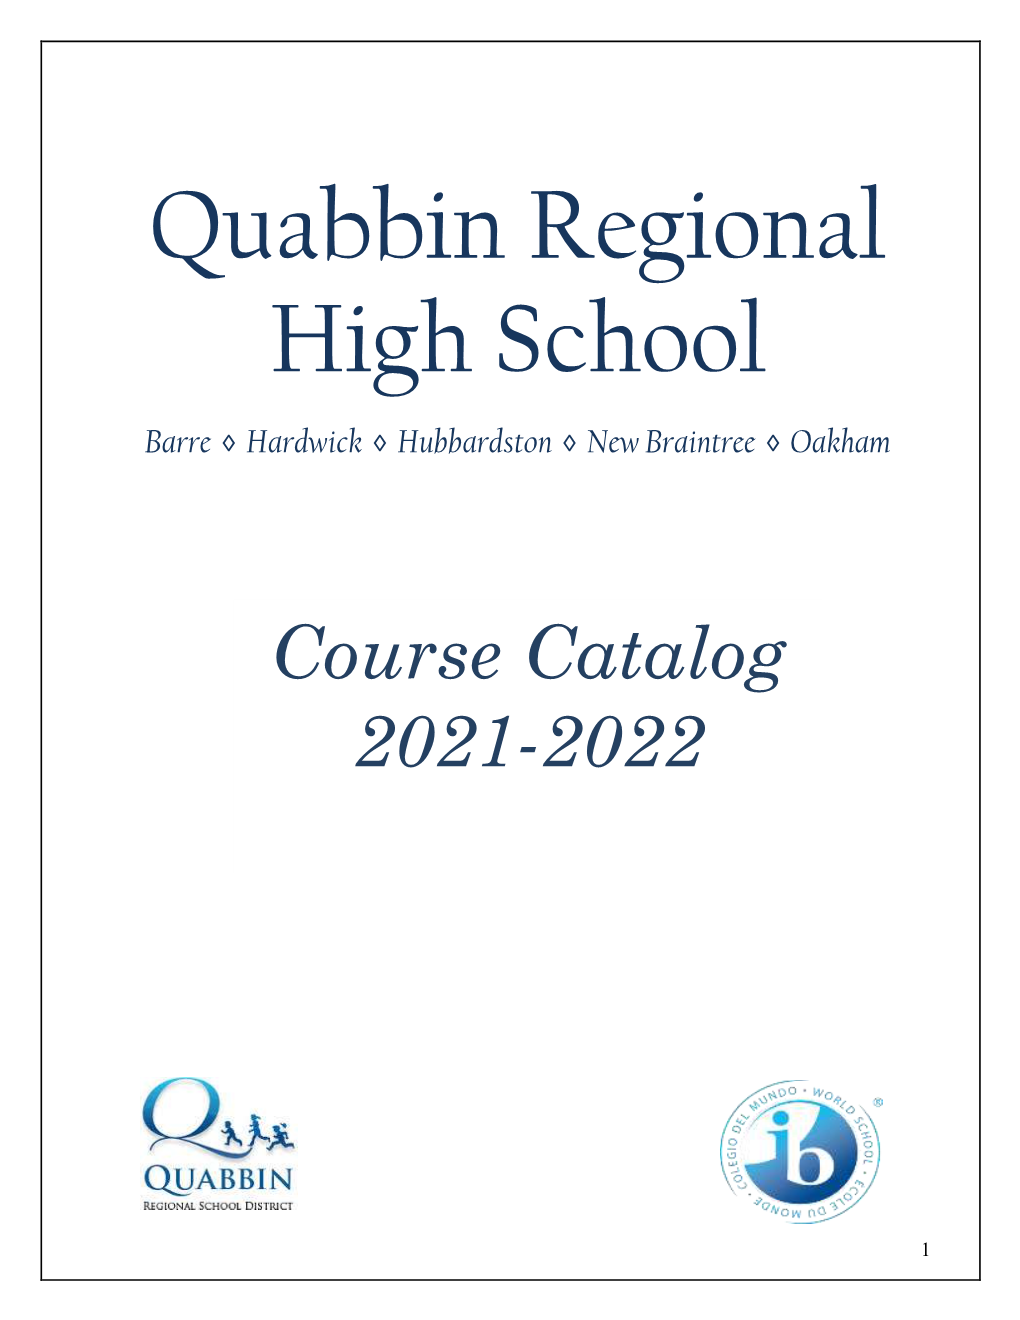 QRHS Course Catalog for 2021-2022